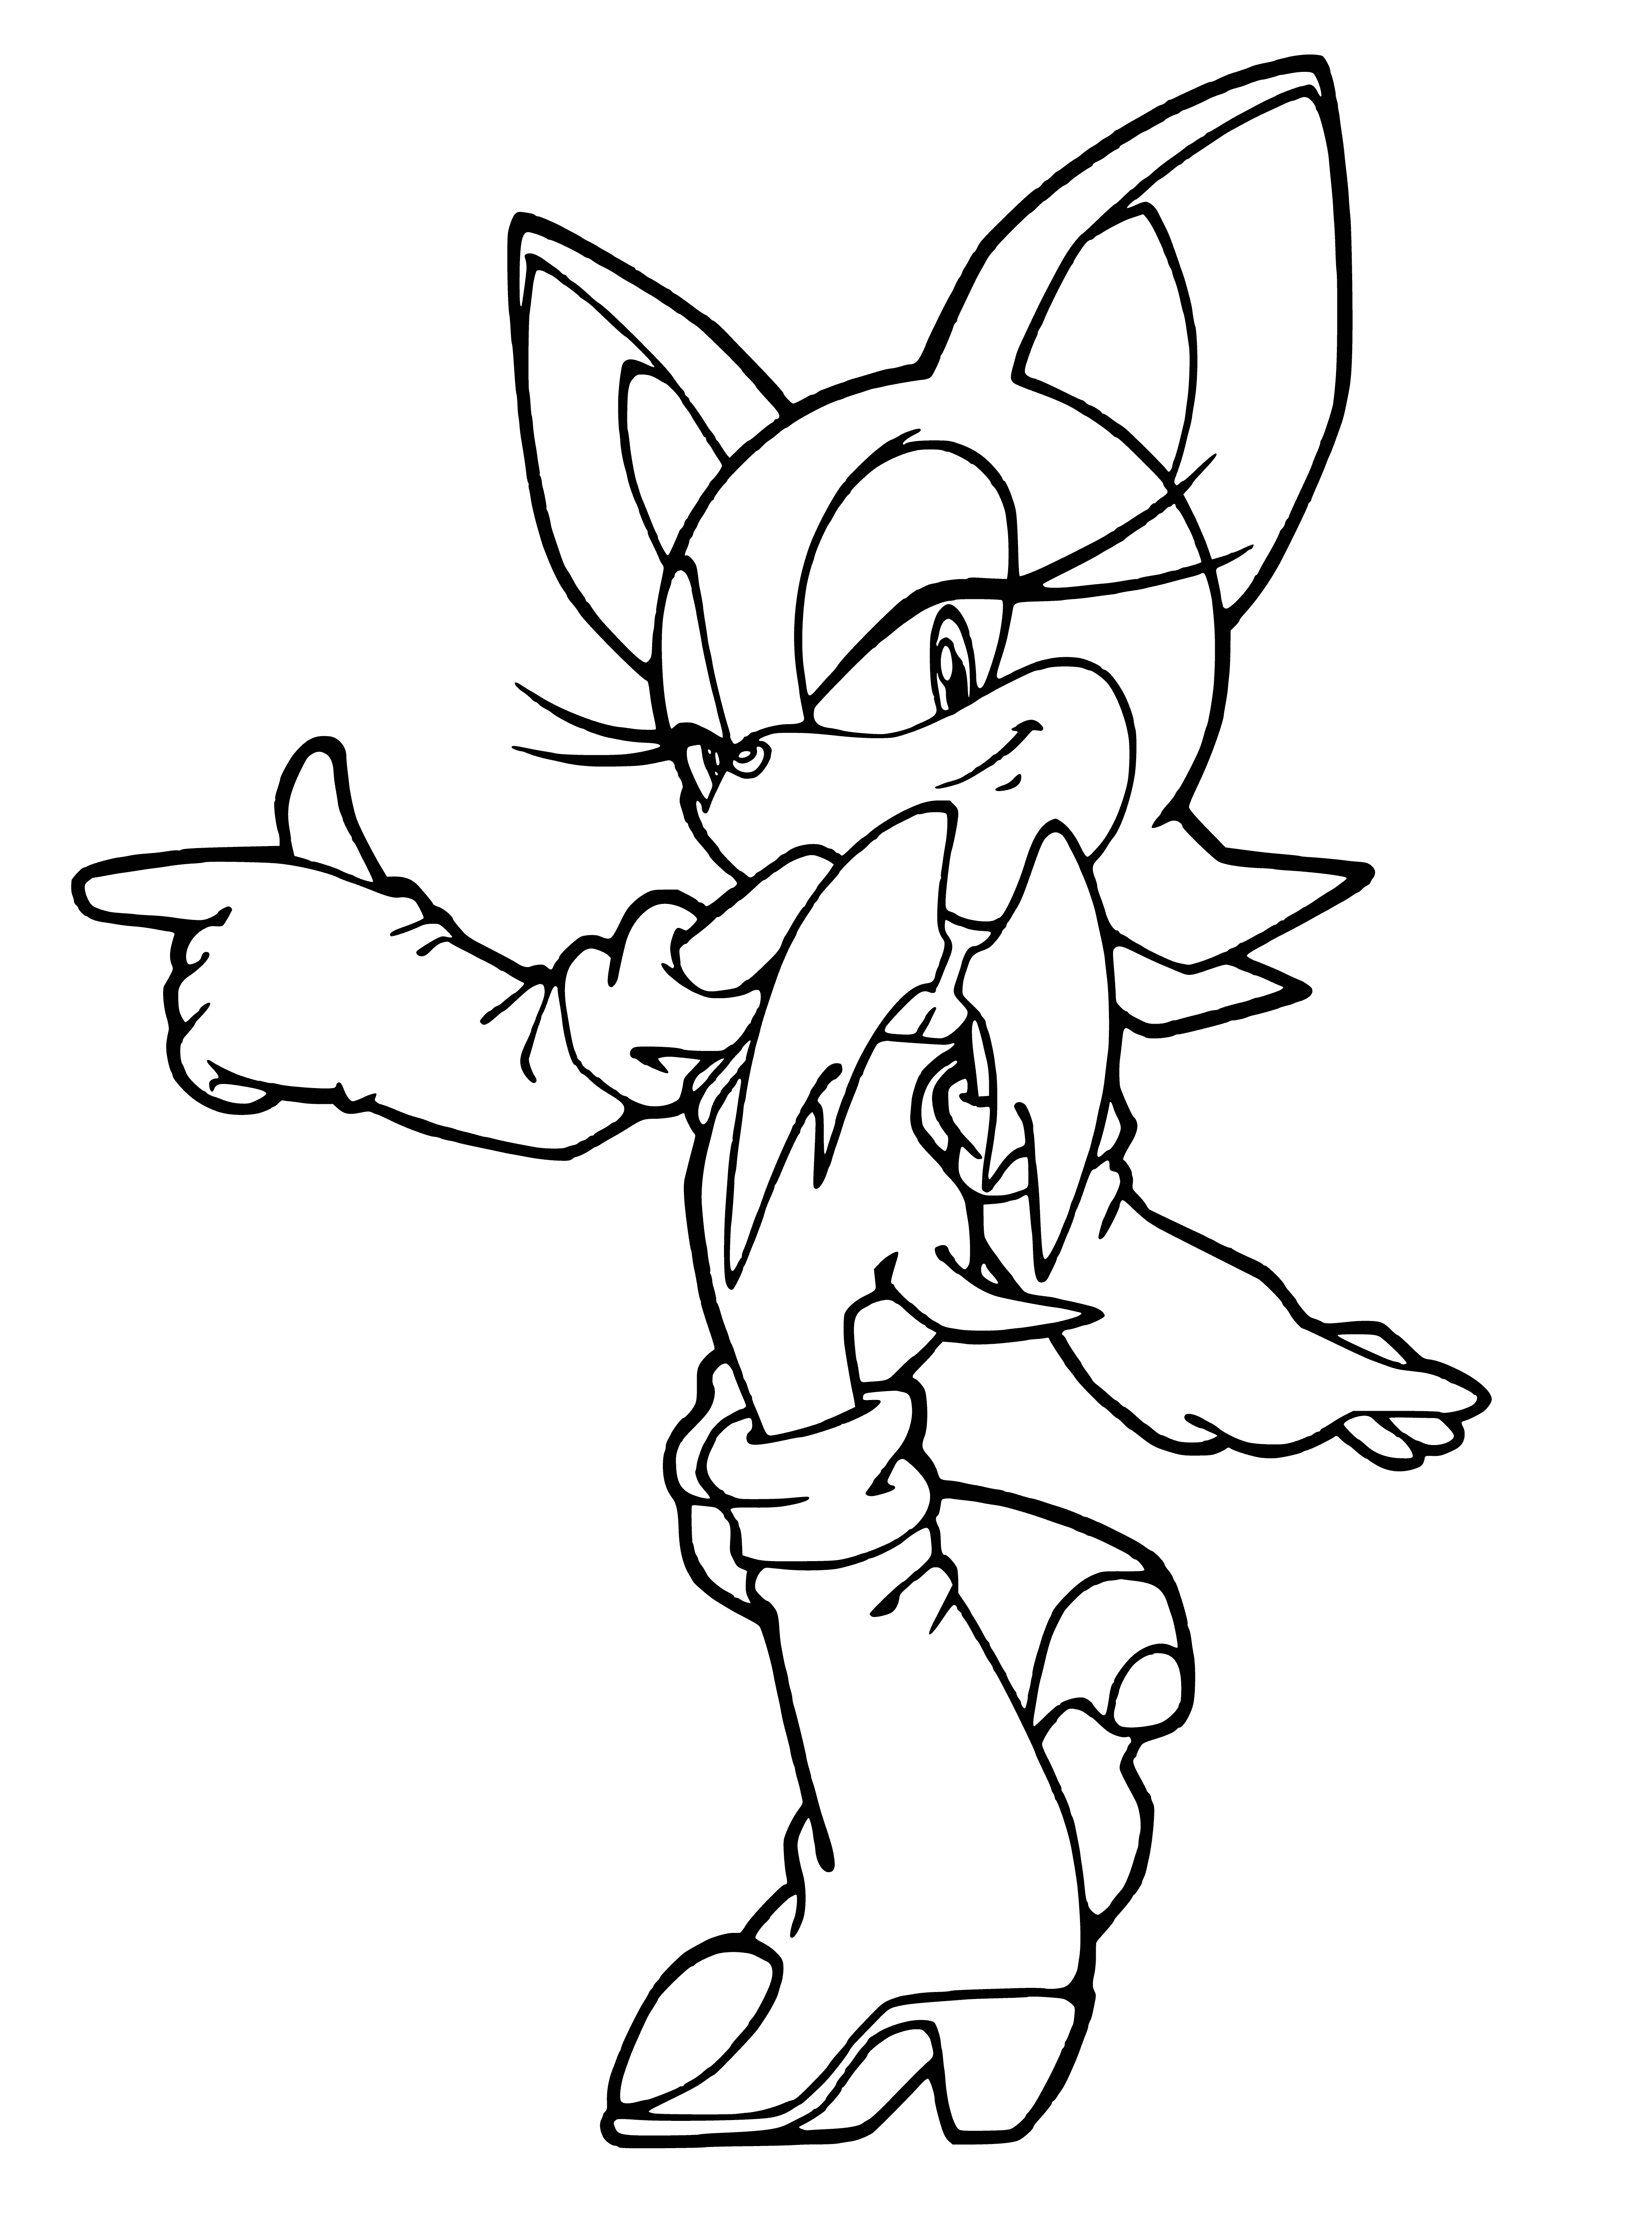 Rouge coloring page